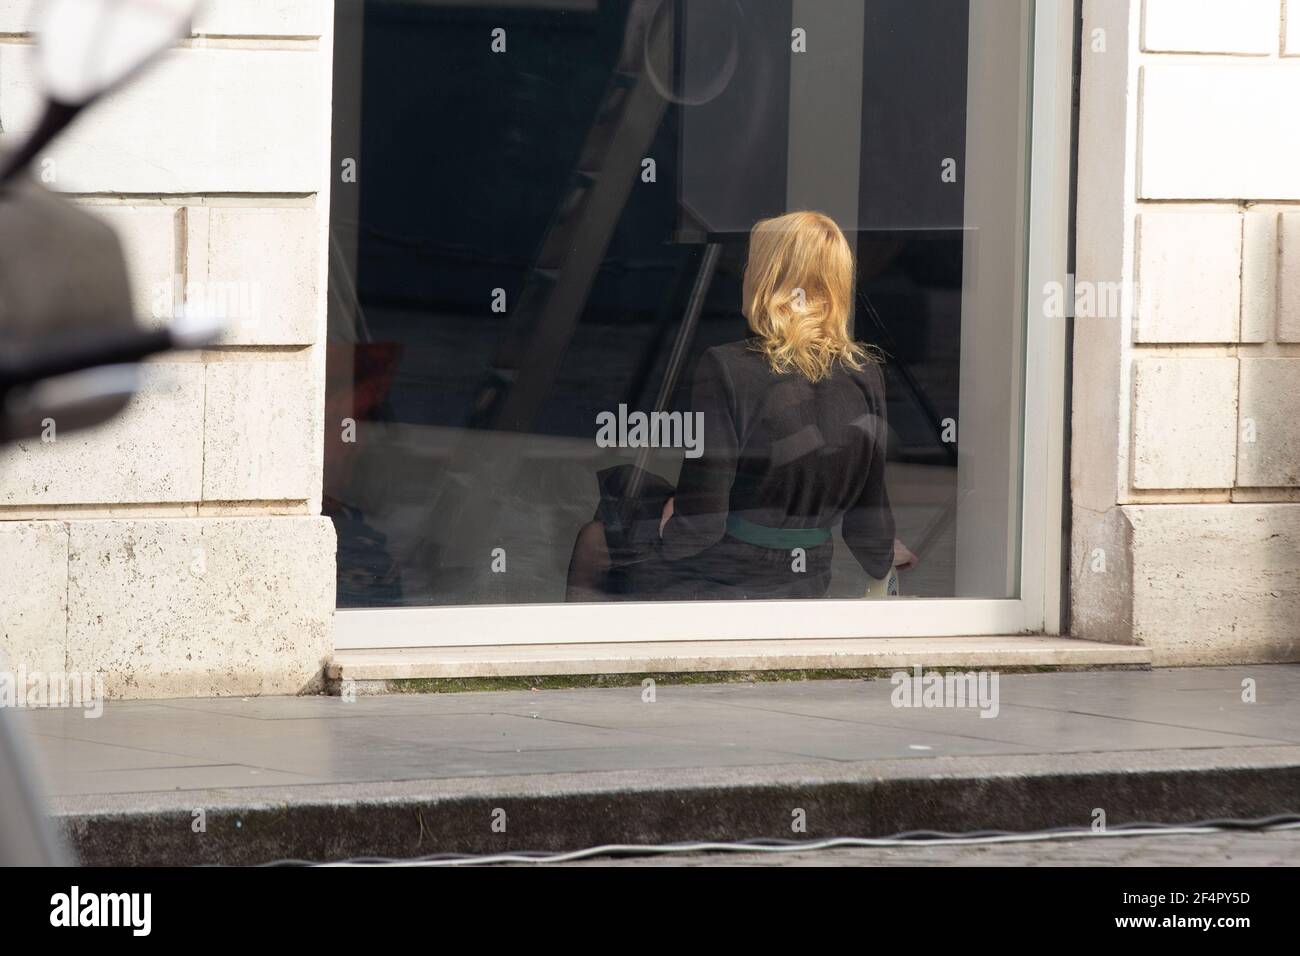 Rome, Italy. 22nd Mar, 2021. British actress Kelly Reilly on the set of film 'Promises' directed by the French director and writer Amanda Sthers (Photo by Matteo Nardone/Pacific Press) Credit: Pacific Press Media Production Corp./Alamy Live News Stock Photo